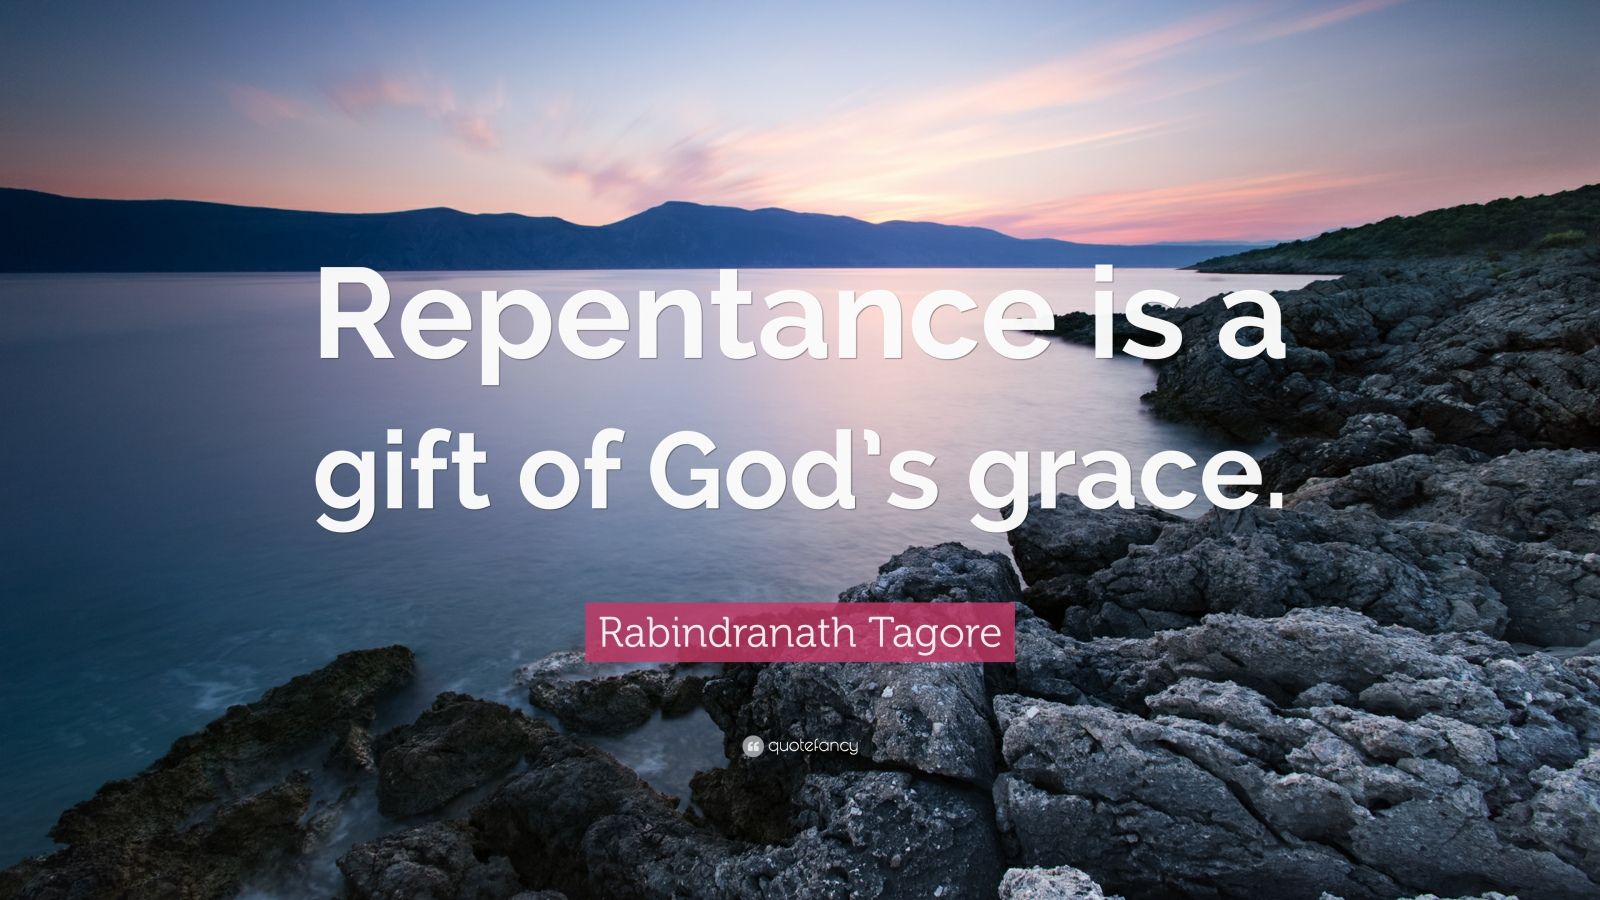 Rabindranath Tagore Quote “Repentance is a gift of God’s